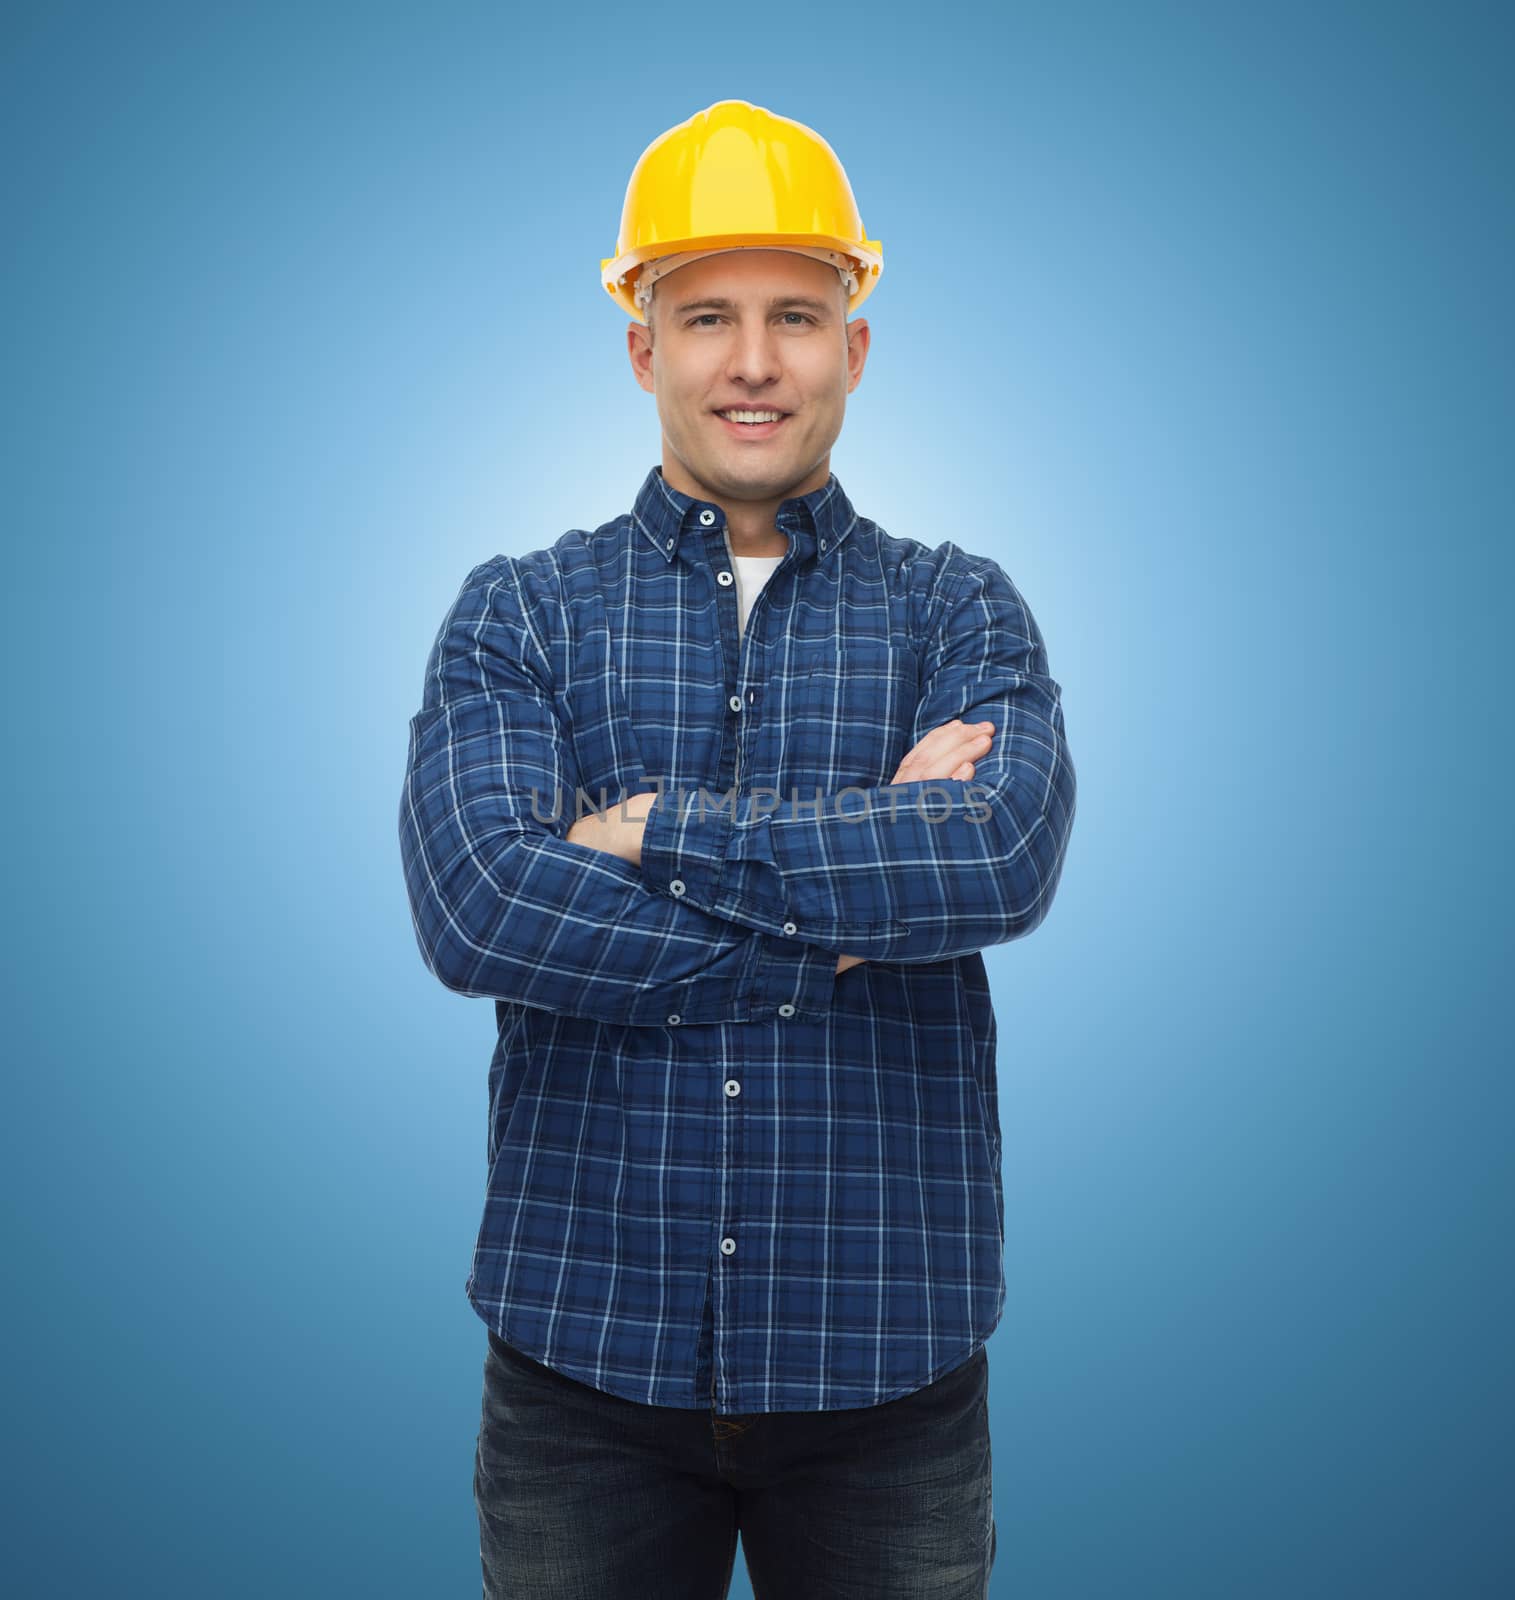 repair, construction, building, people and maintenance concept - smiling male builder or manual worker in helmet over blue background